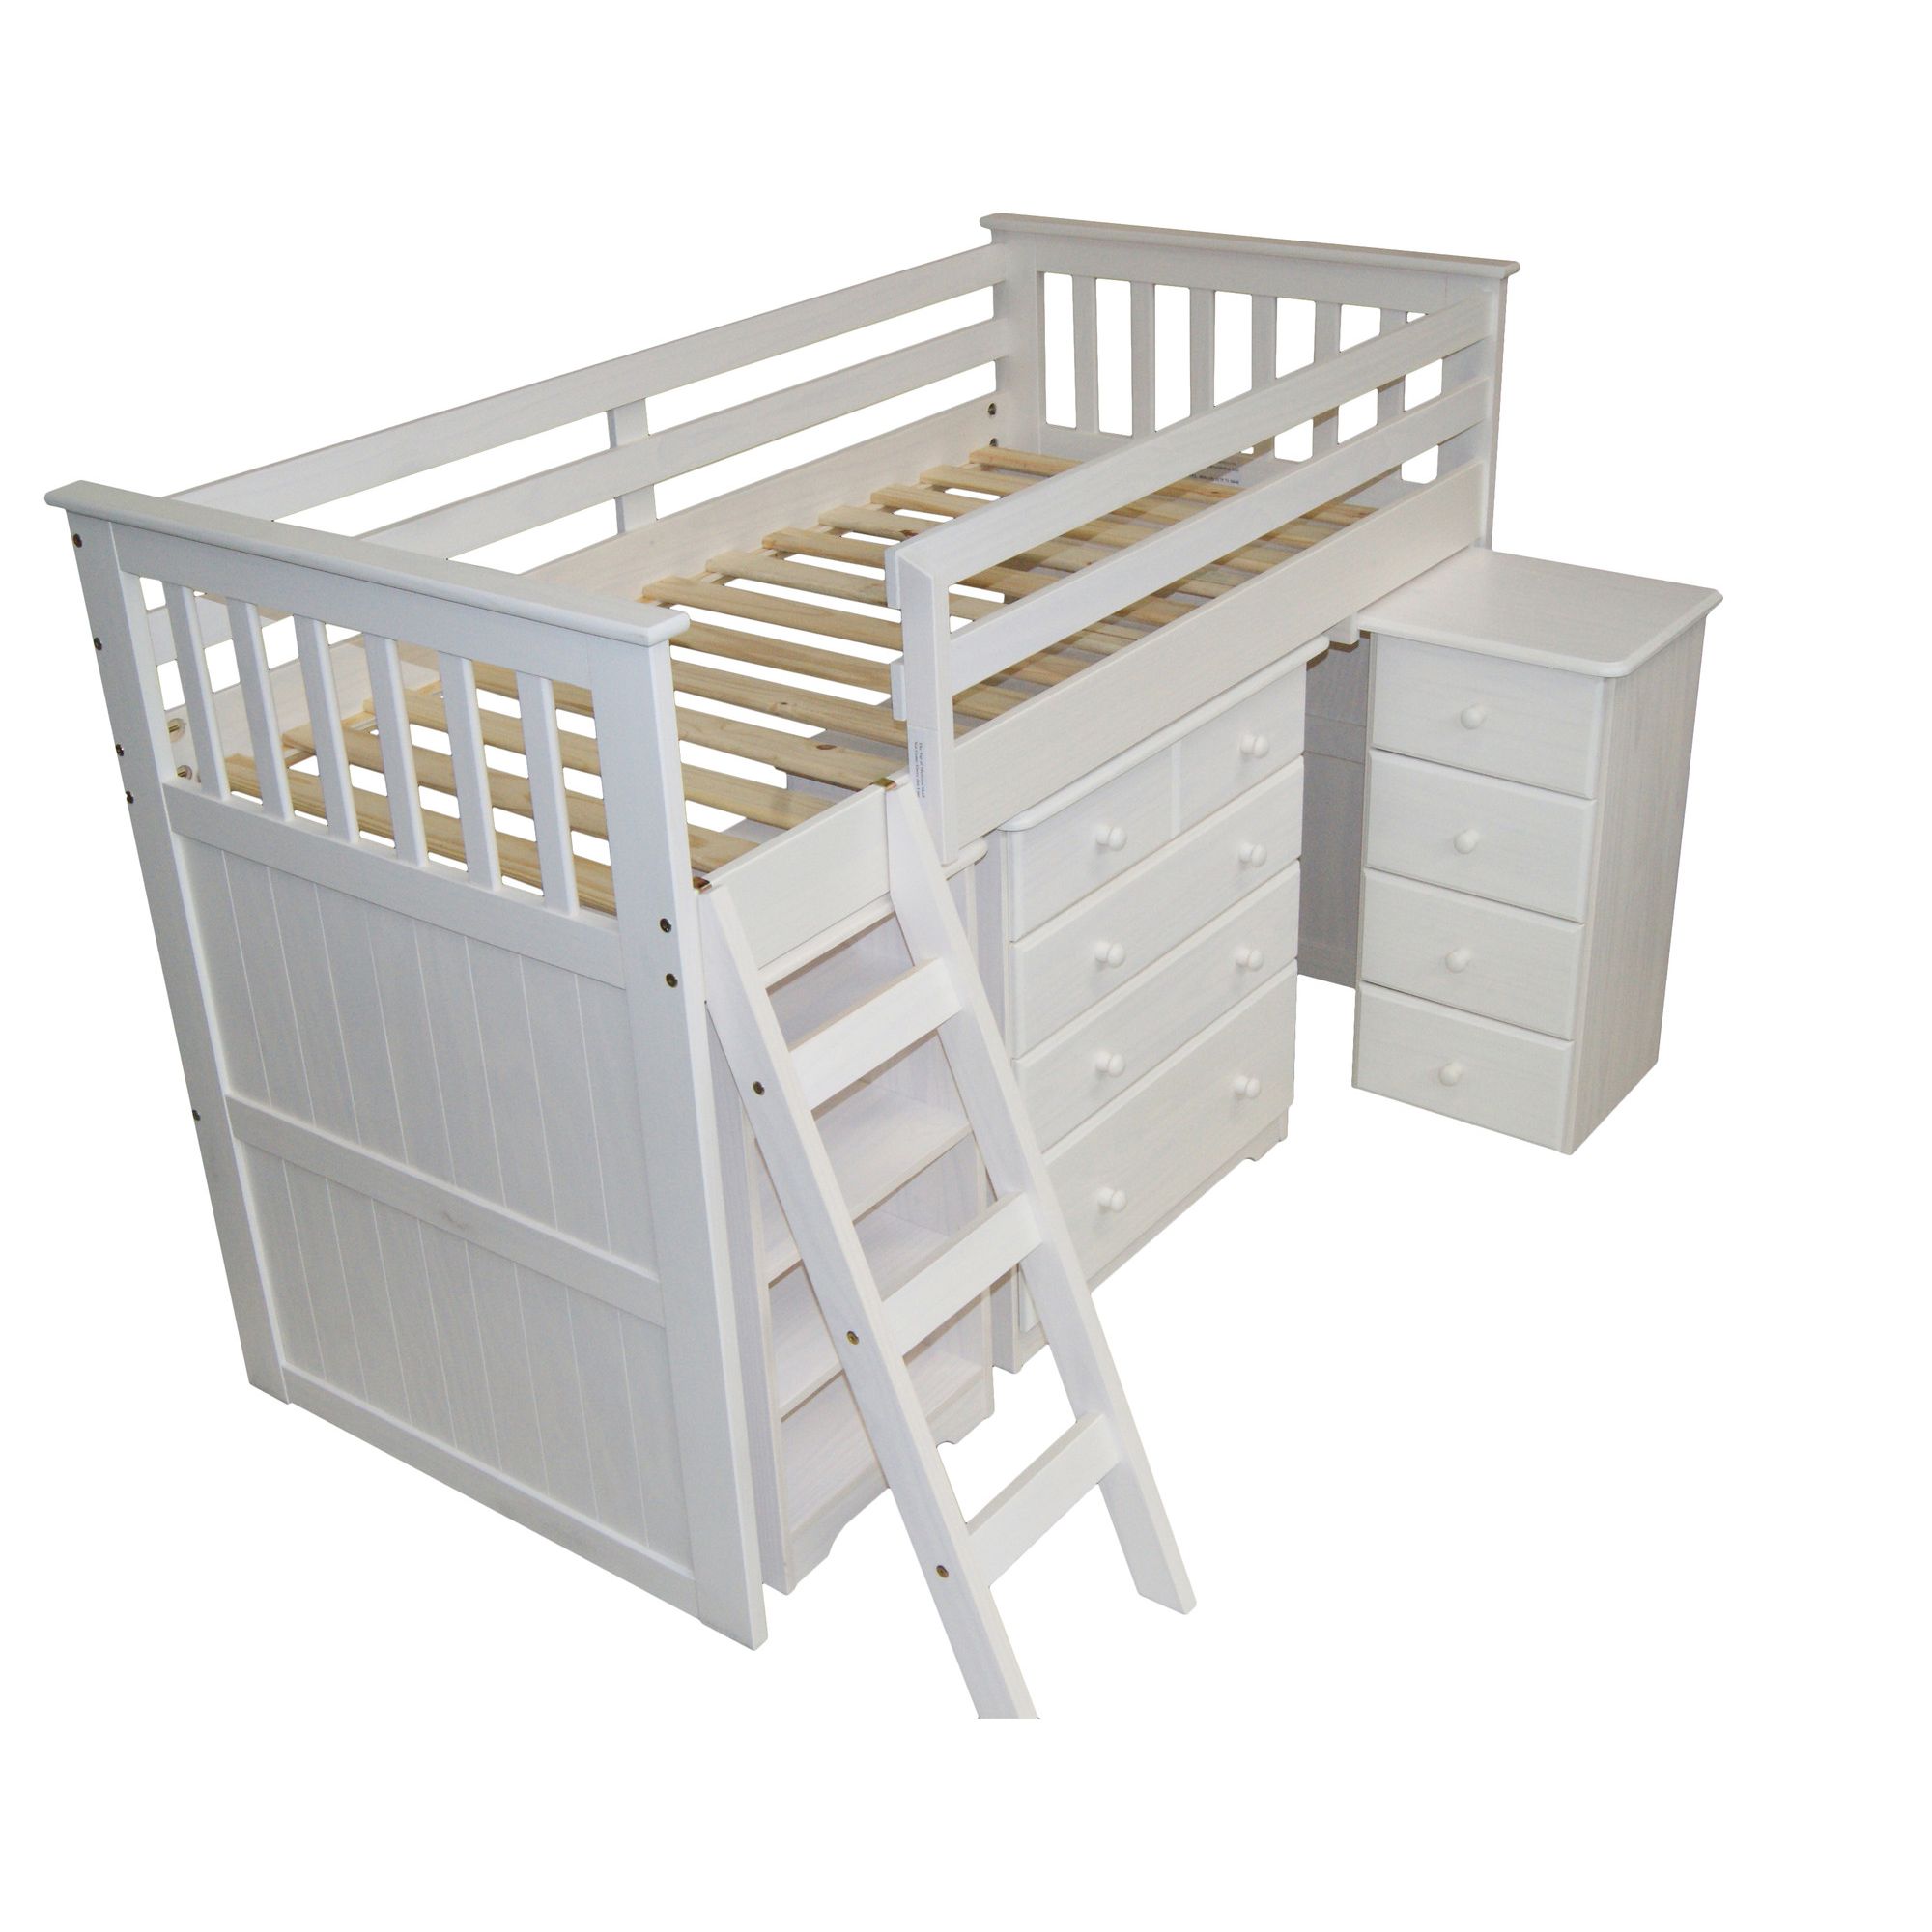 Amani Mid Sleeper Cabin Bed - White at Tesco Direct